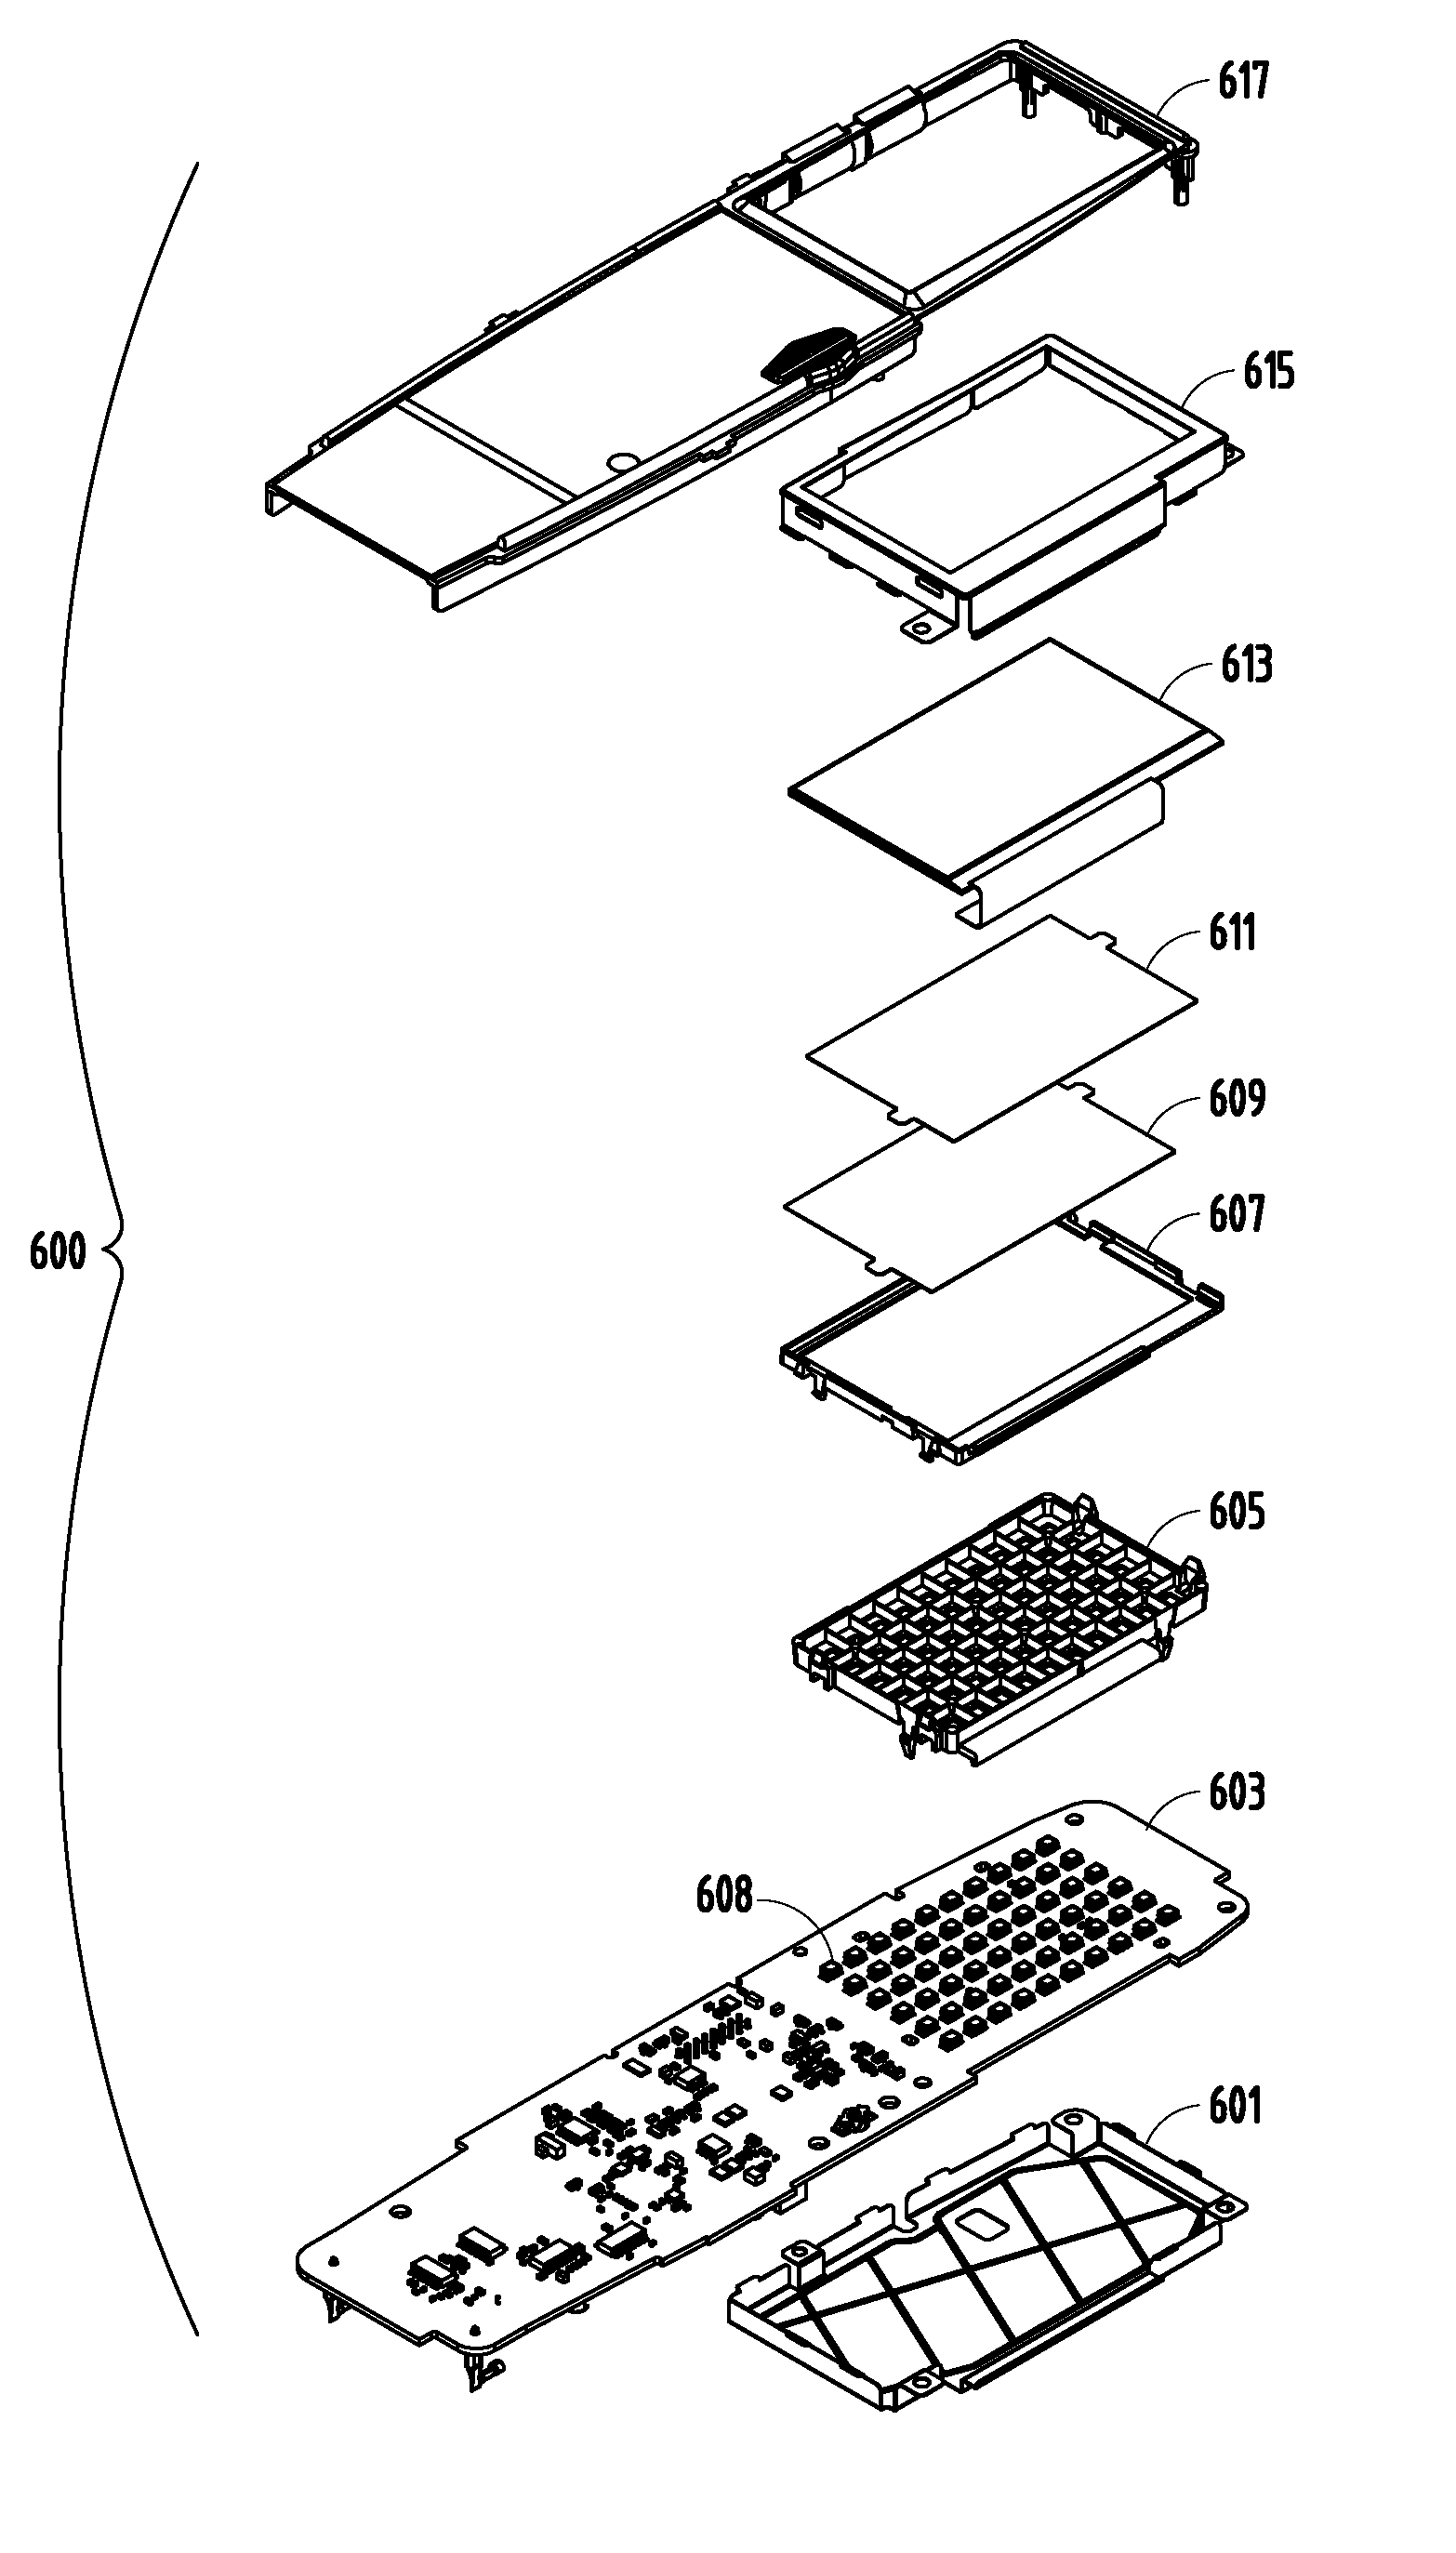 Vehicular rearview mirror assembly including integrated backlighting for a liquid crystal display (LCD)